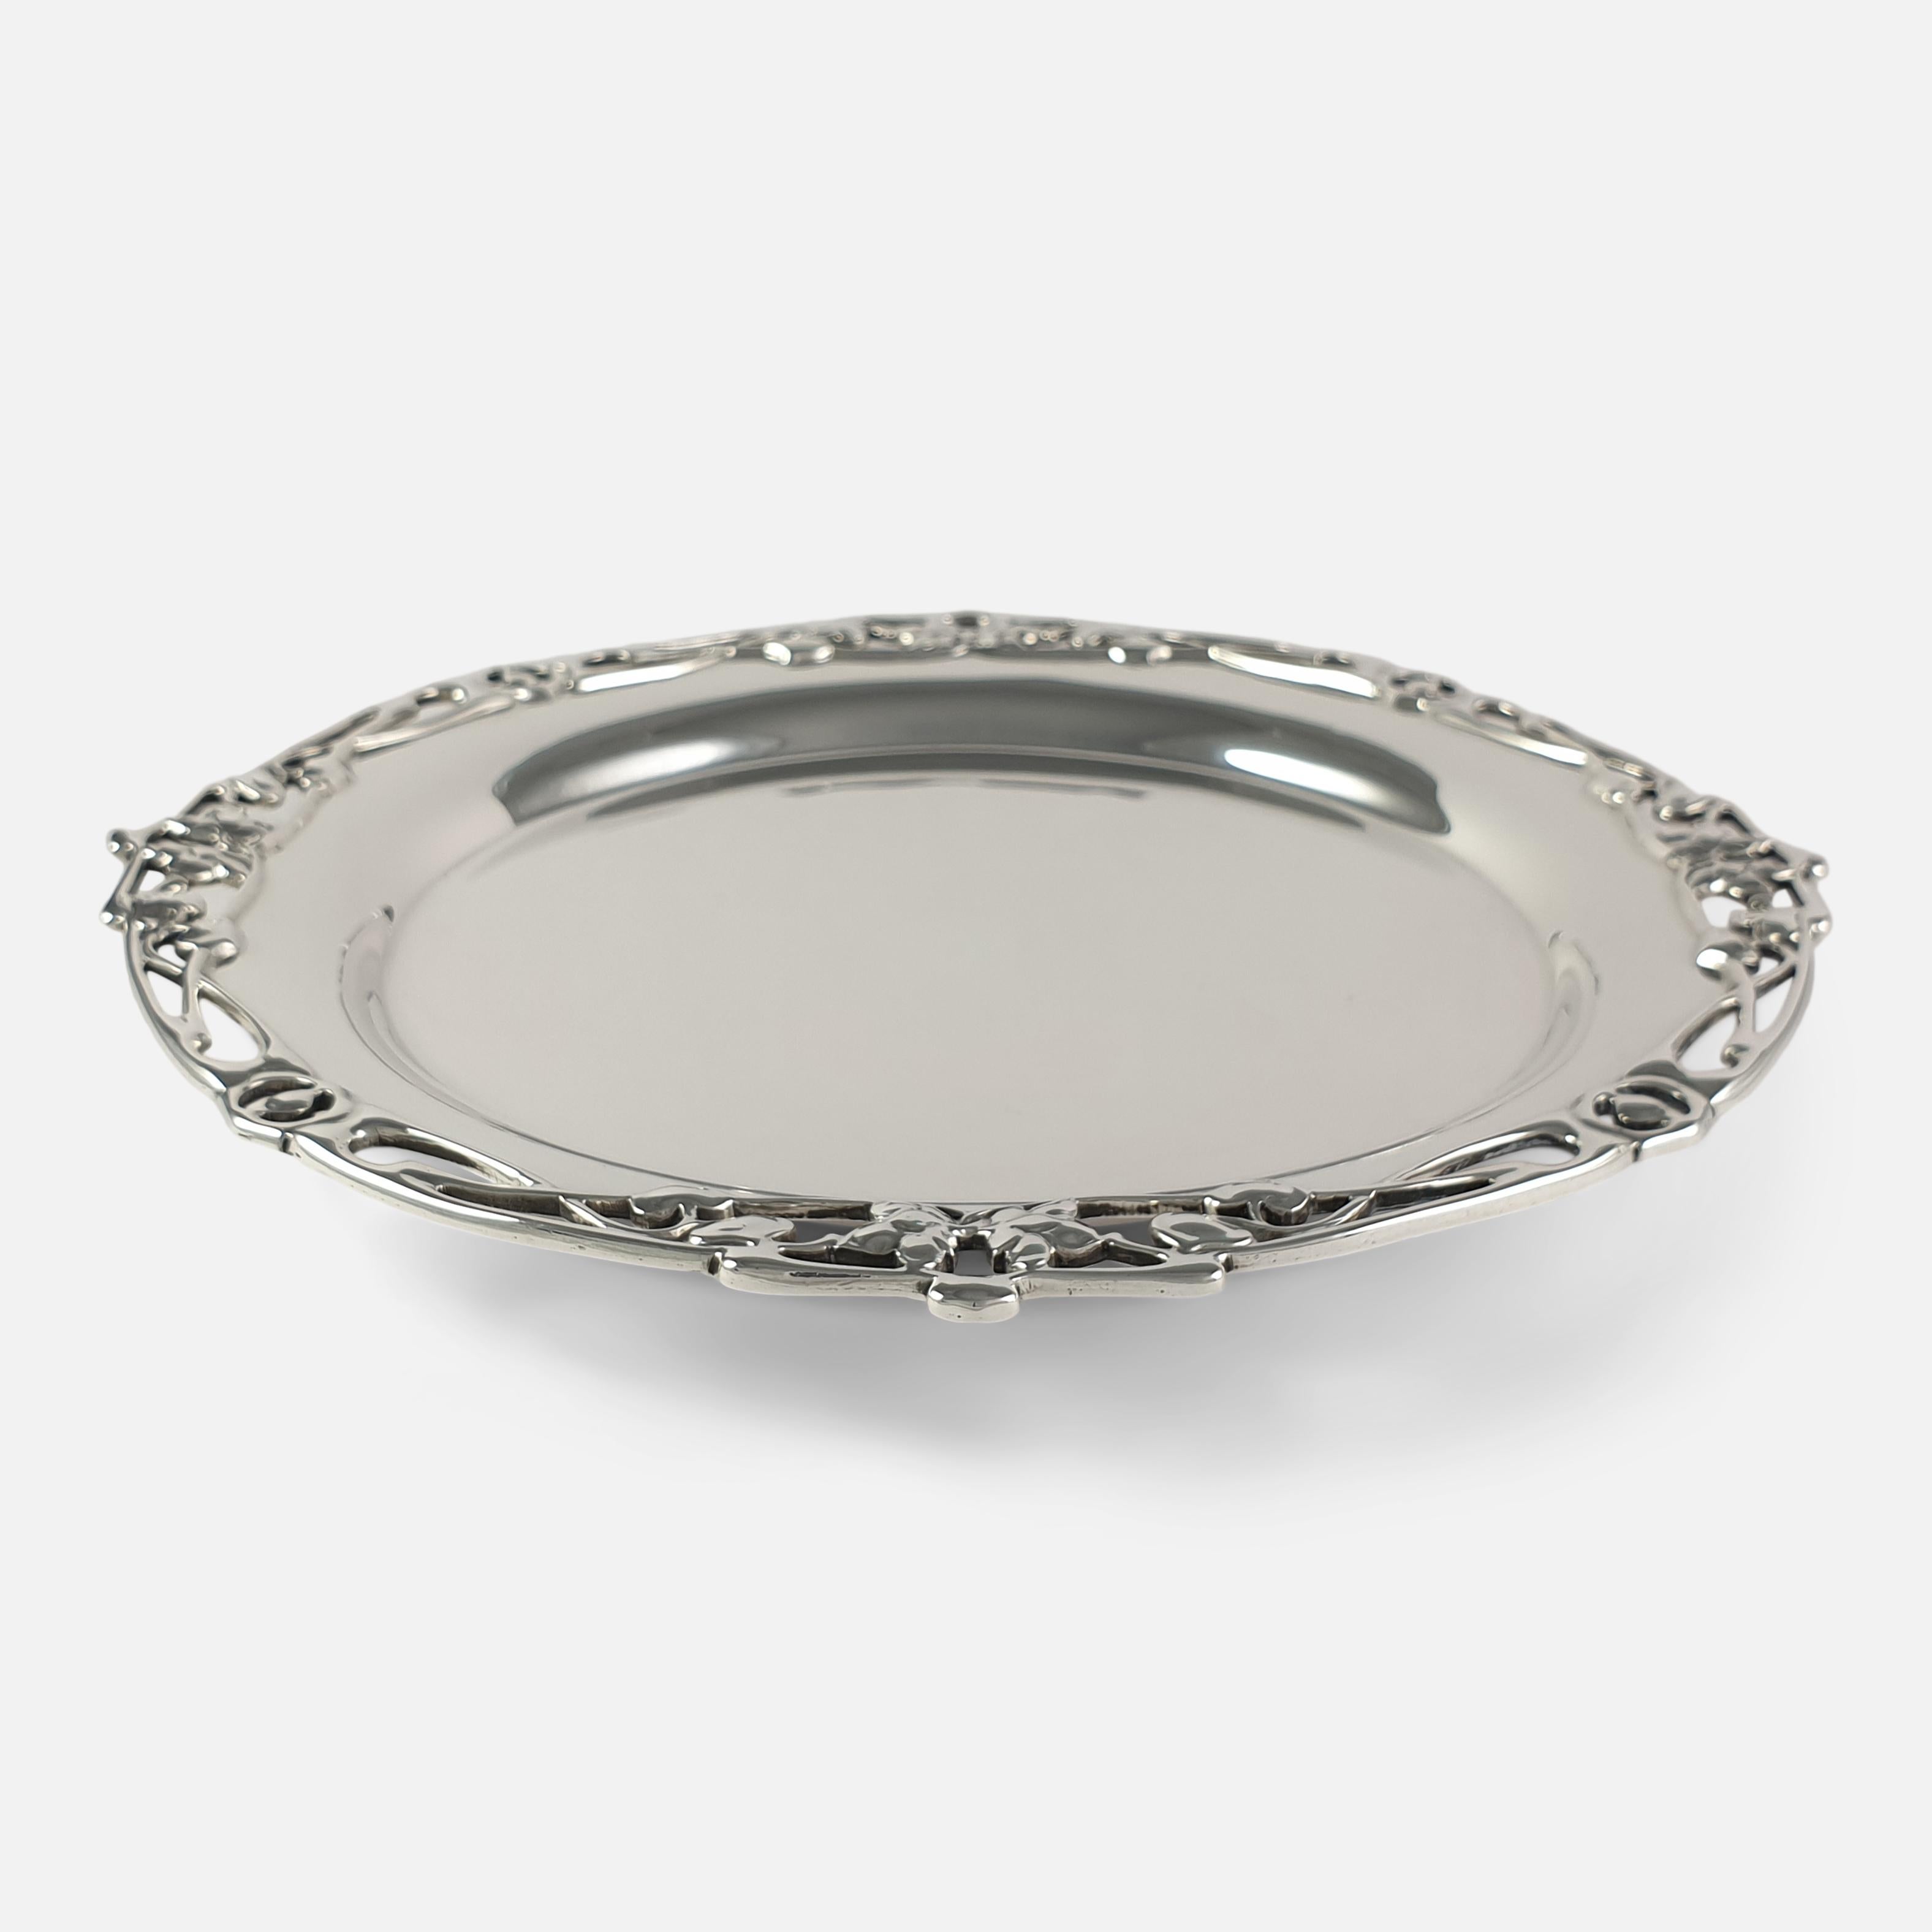 Early 20th Century Art Nouveau Sterling Silver Salver, 1906